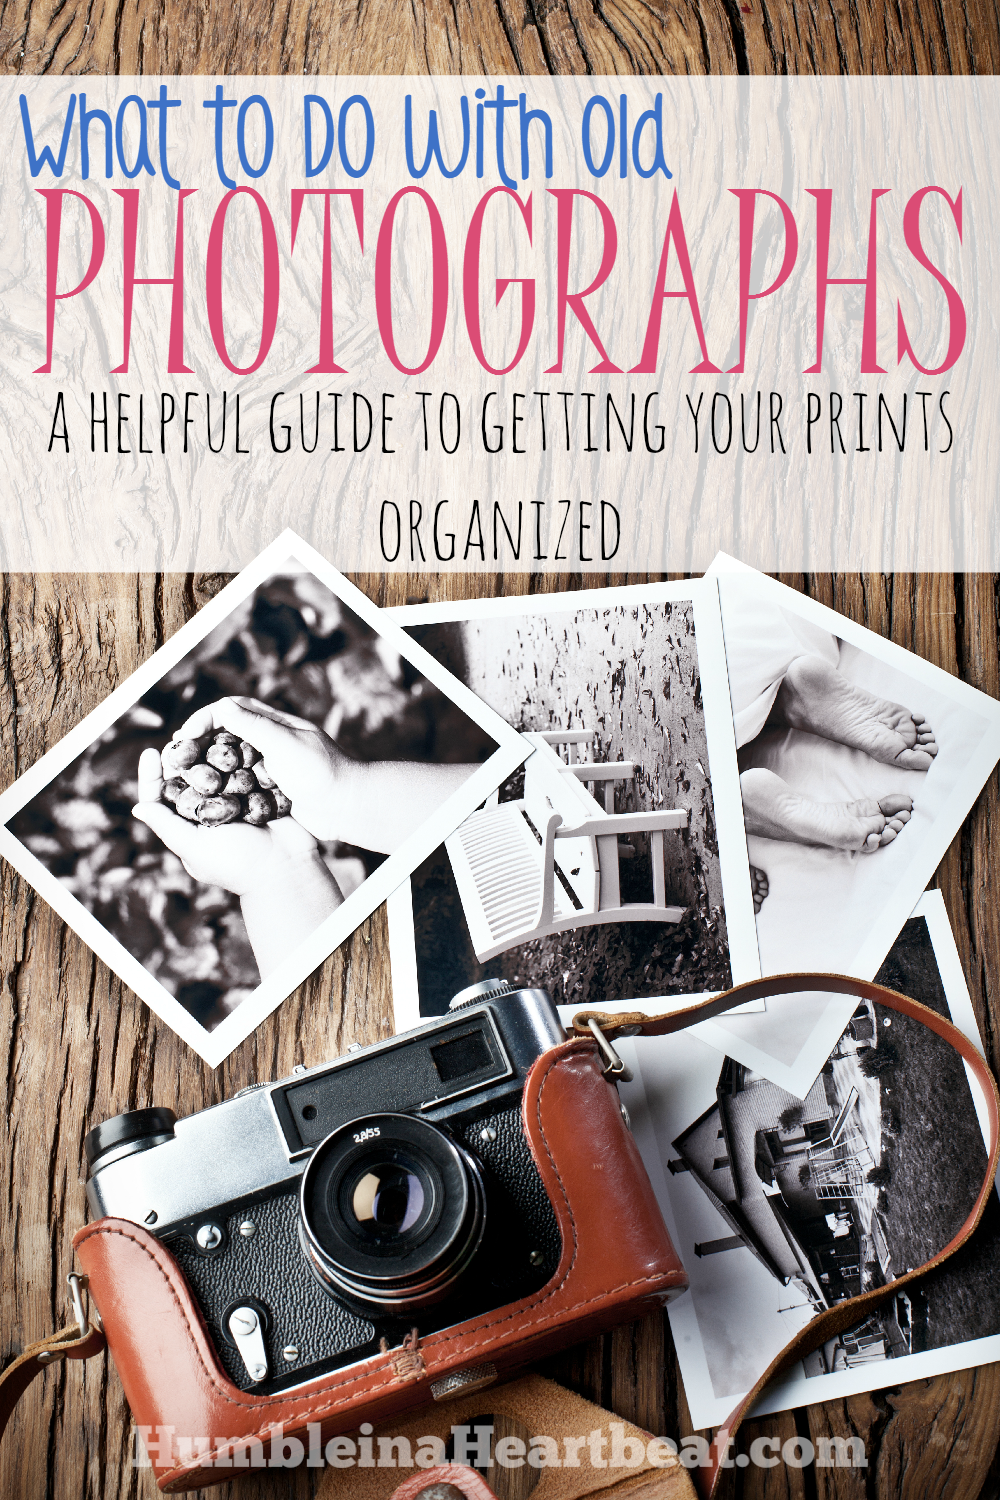 If you've got a box (or several boxes) of pictures in your basement, you need to organize them! This post will motivate you and teach you how to get those pictures out of that basement and out where you can enjoy them!